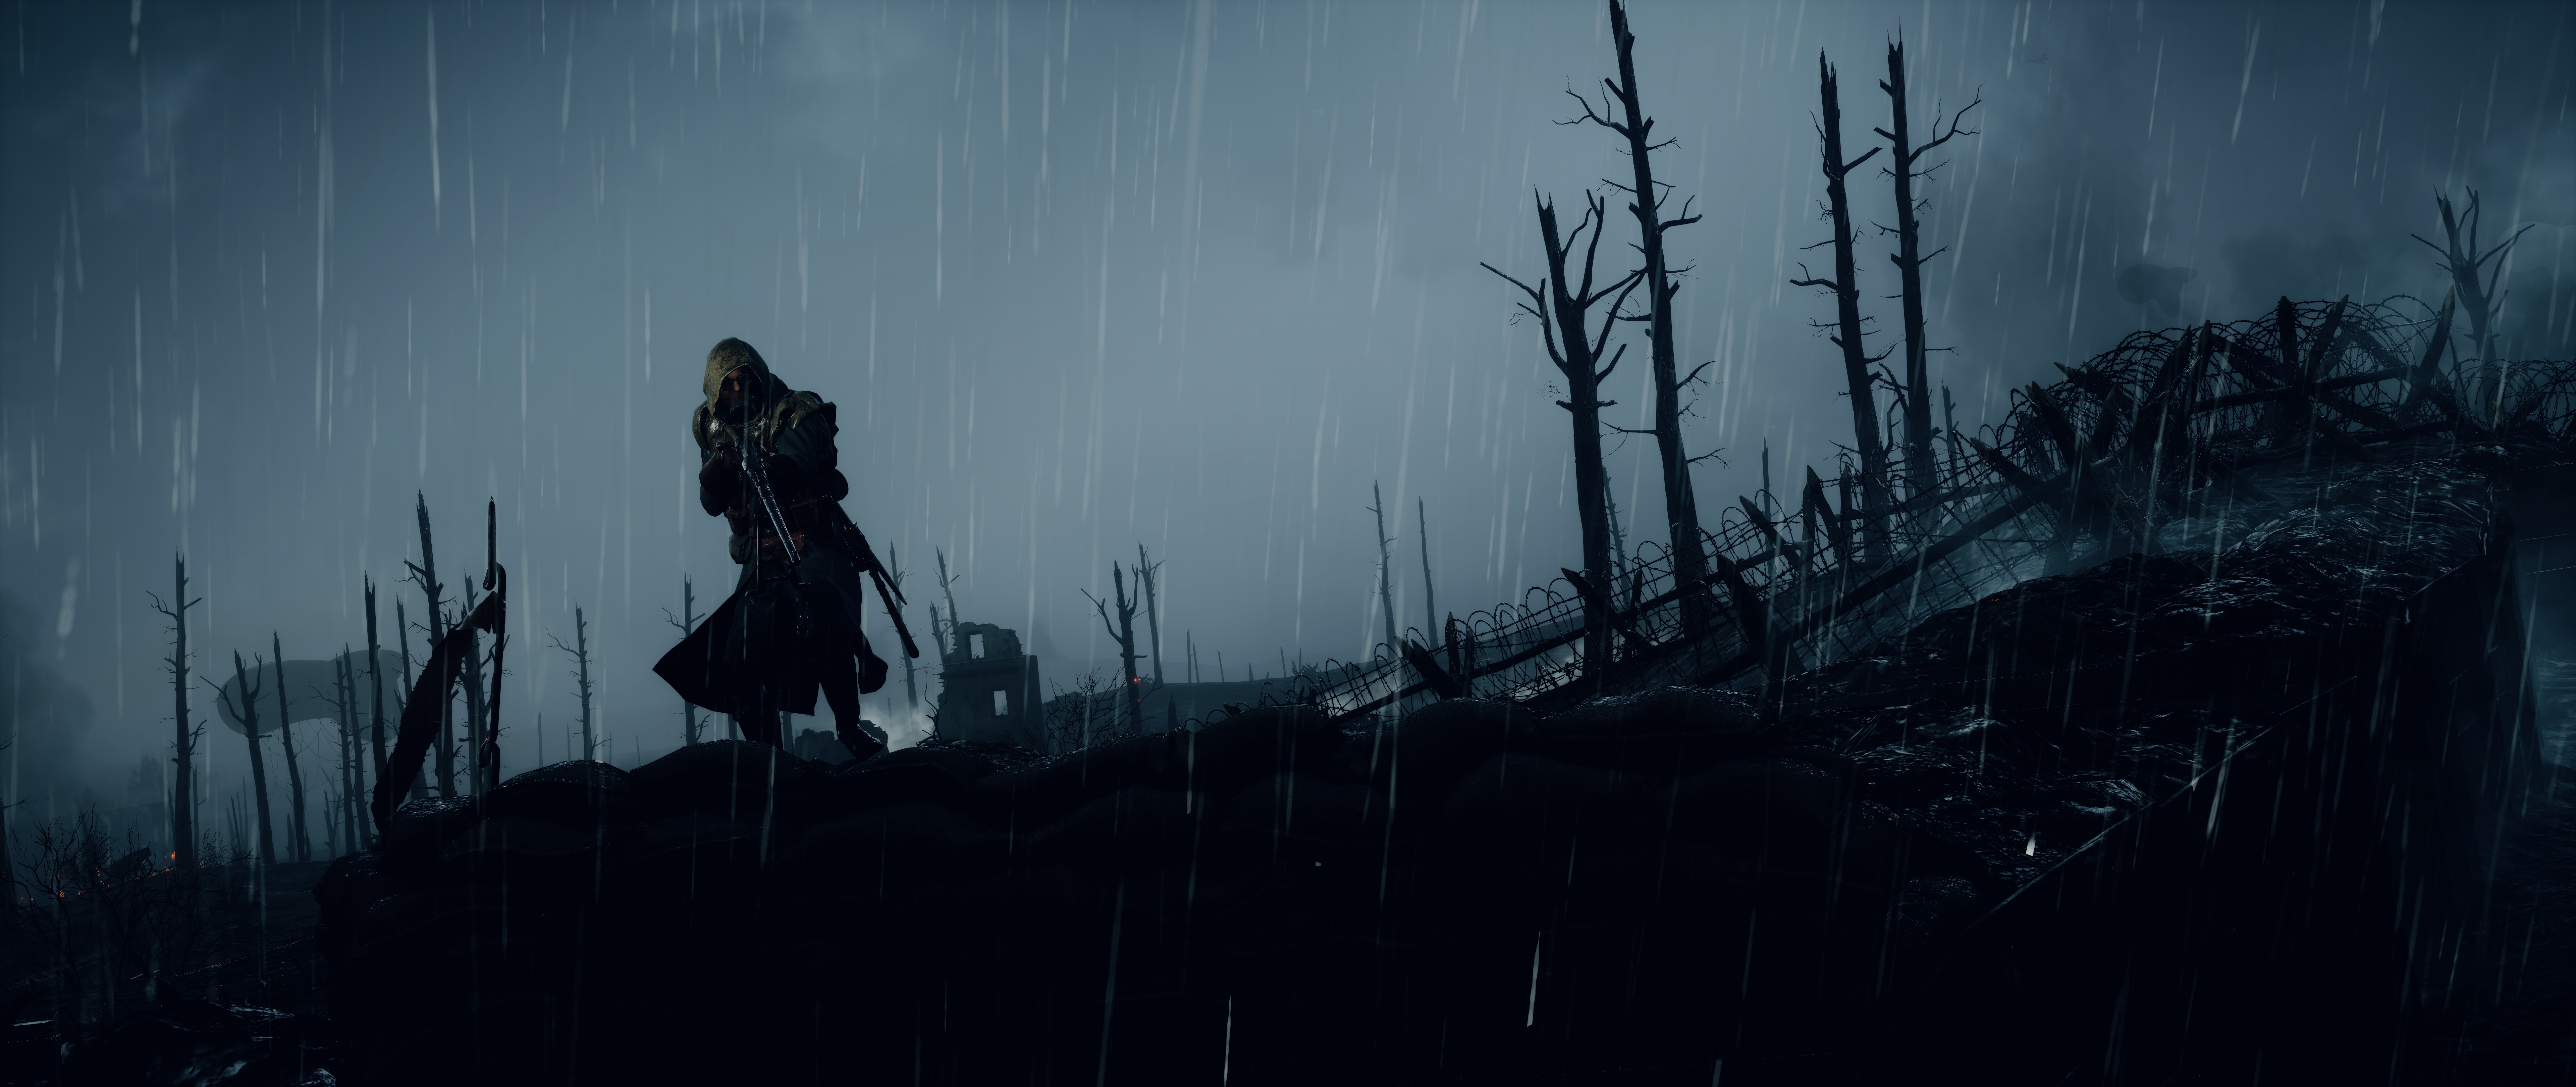 Download Immersive Experience in Rainy Battlefield Live Gaming Wallpaper